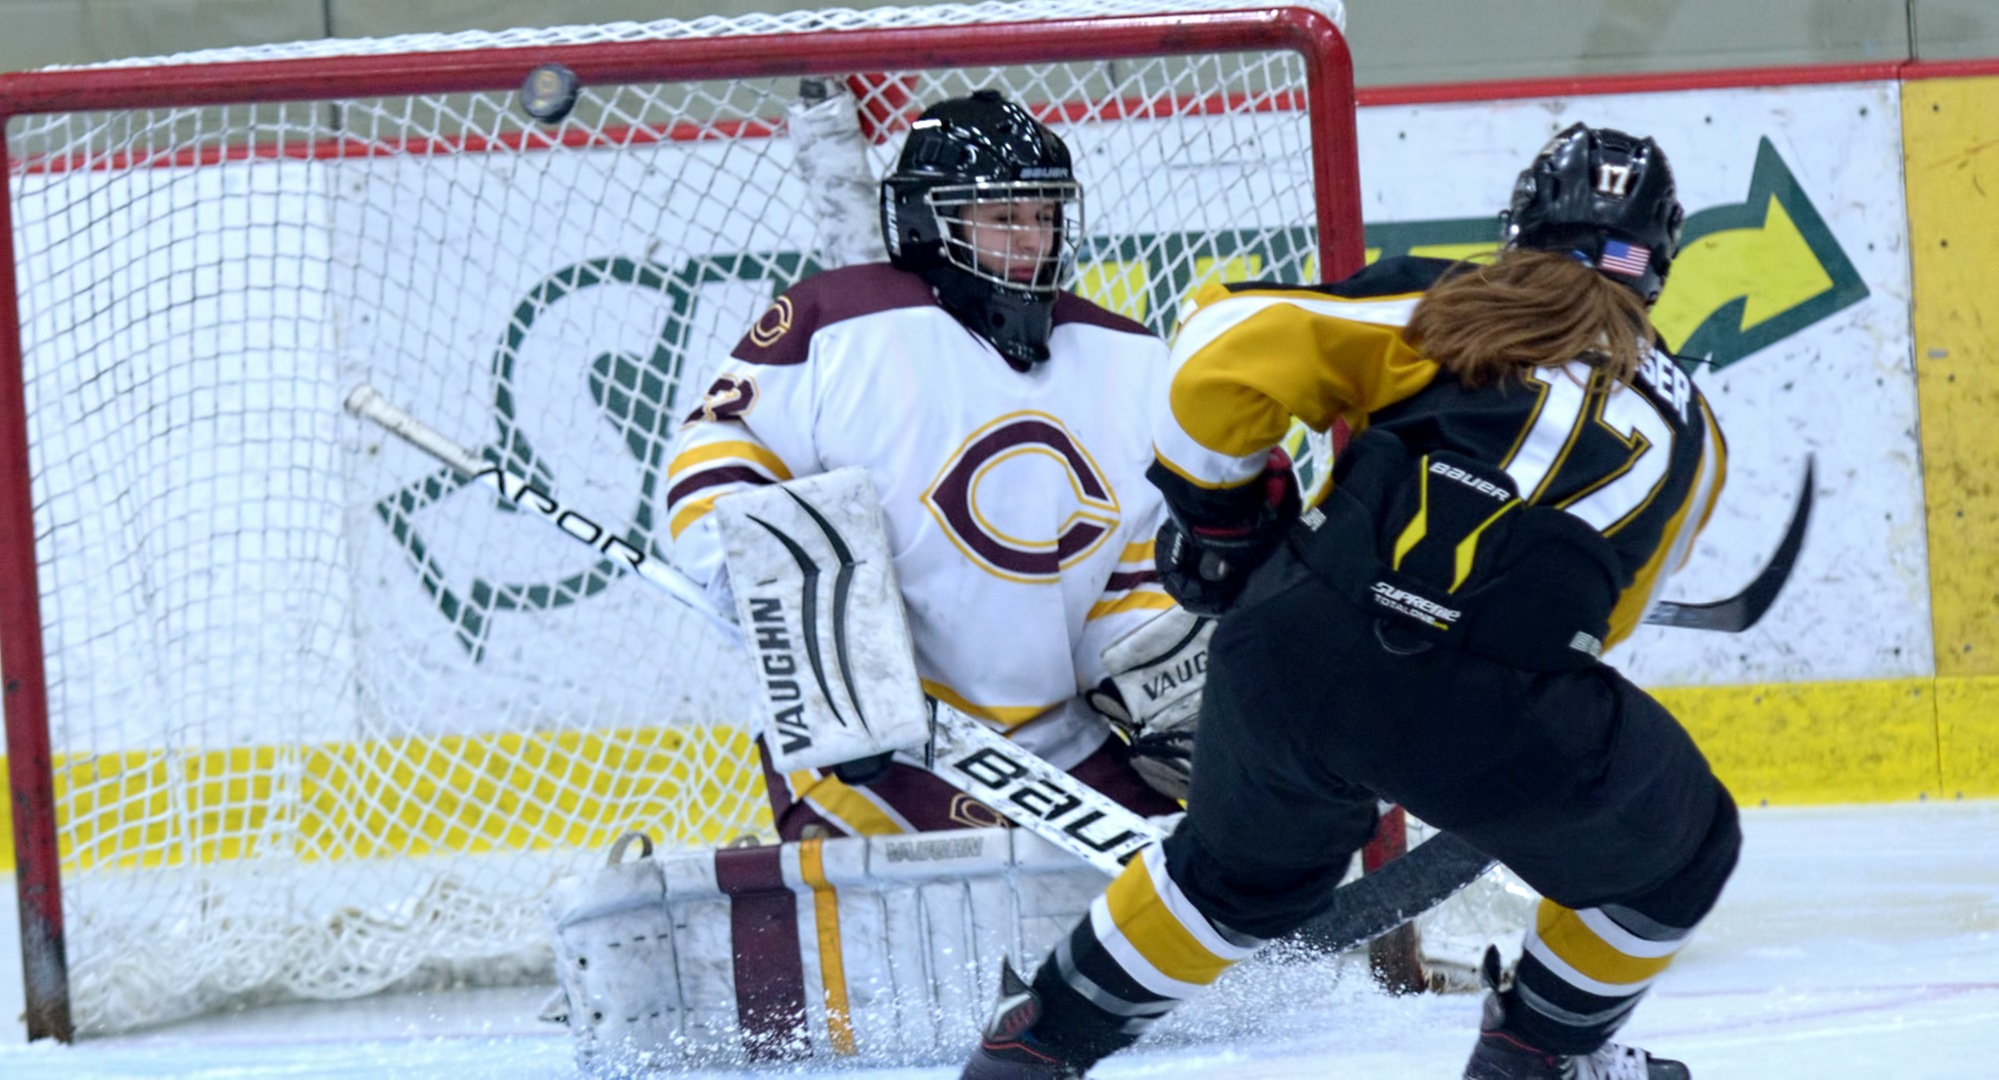 Cobber goalie Brittany Boss watches the puck deflect away from goal after making a save during the second period of the Cobbers' series finale with St. Olaf.